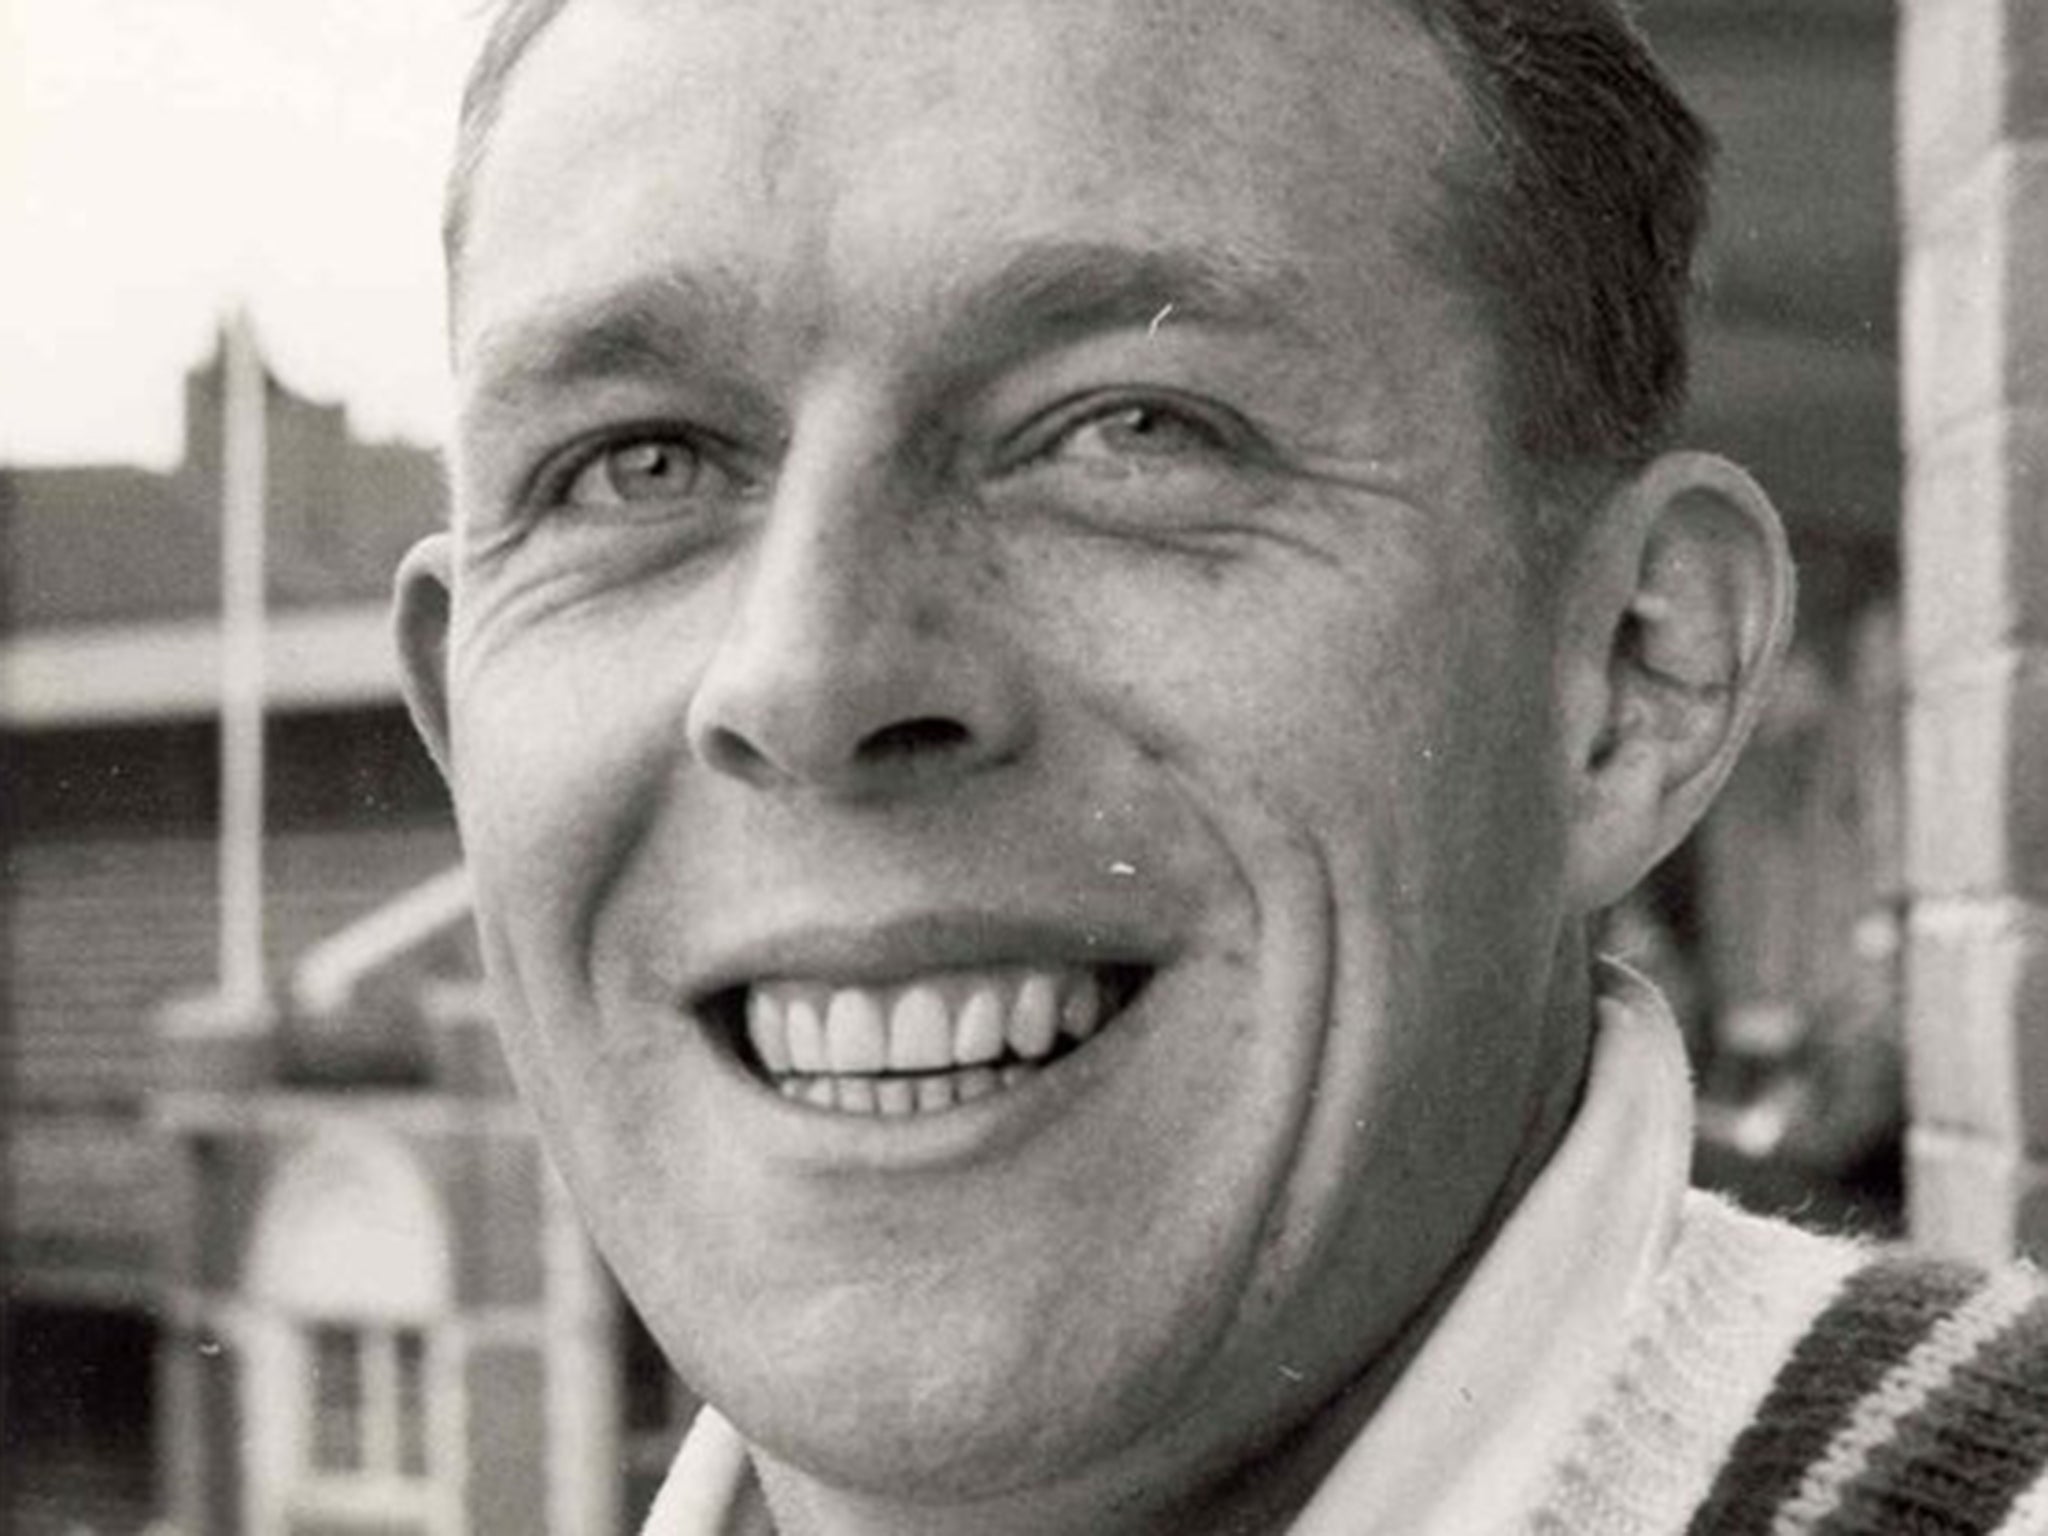 Hilton began the 1960 season by breaking Dickie Bird’s finger and ended it by scattering Henry Blofeld’s stumps